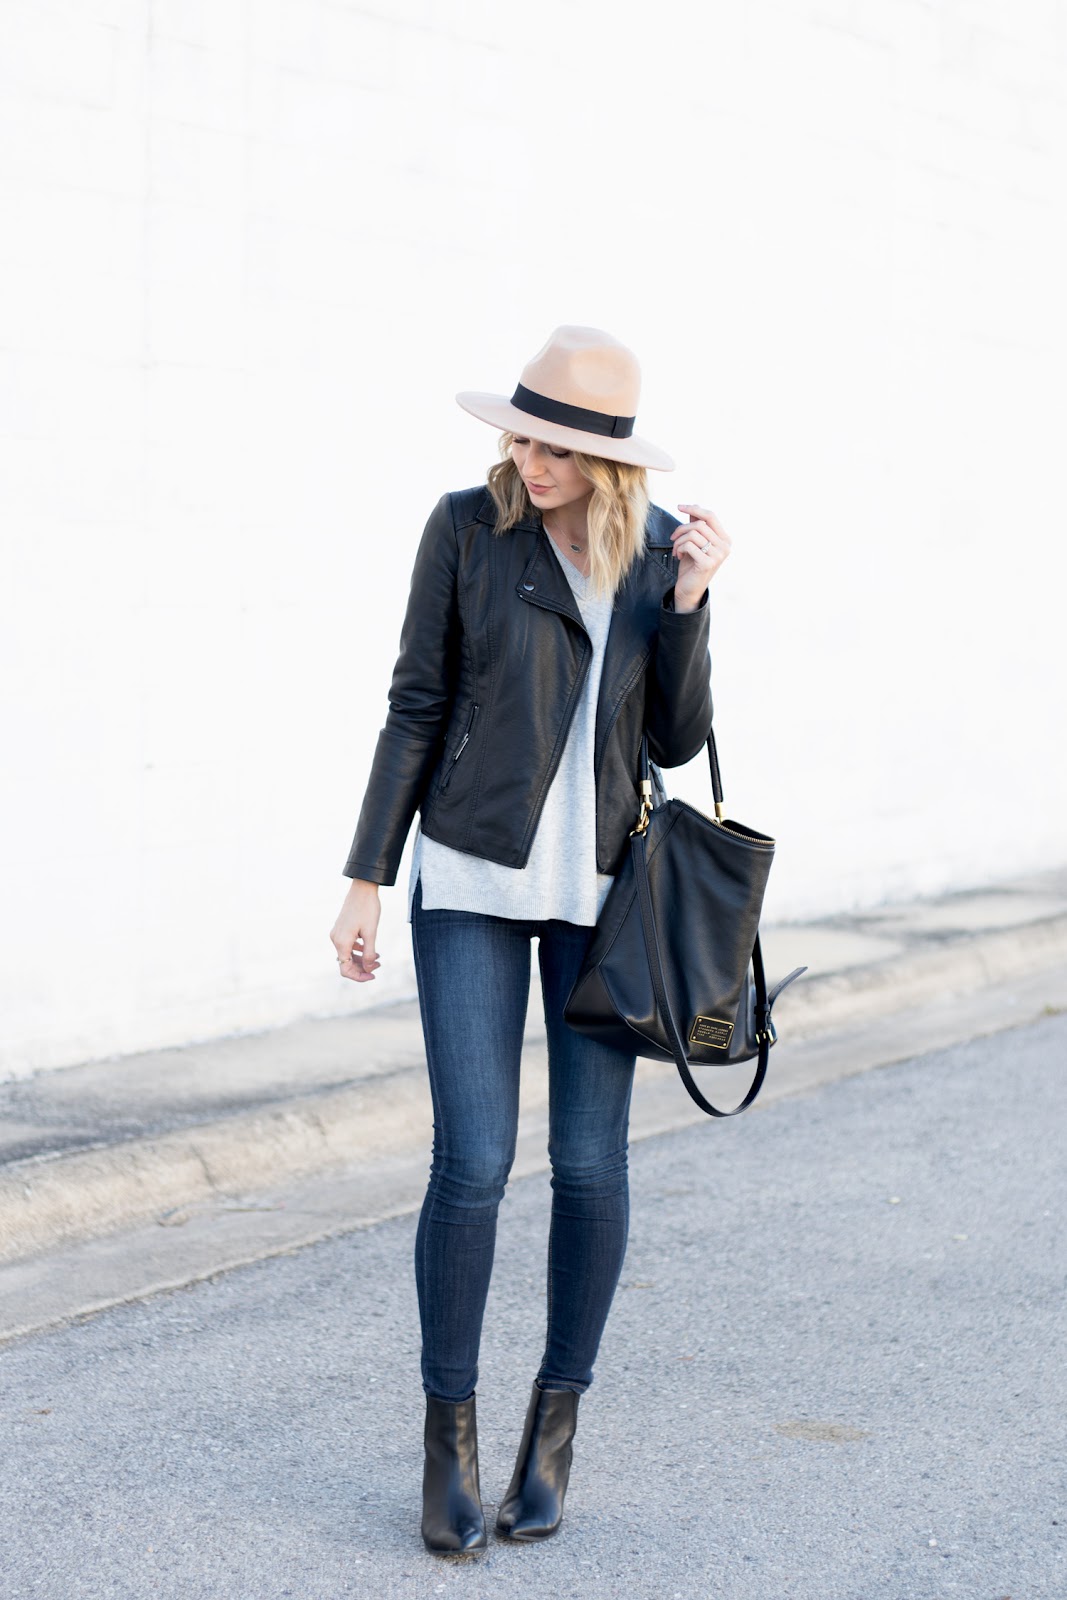 Neutral layers